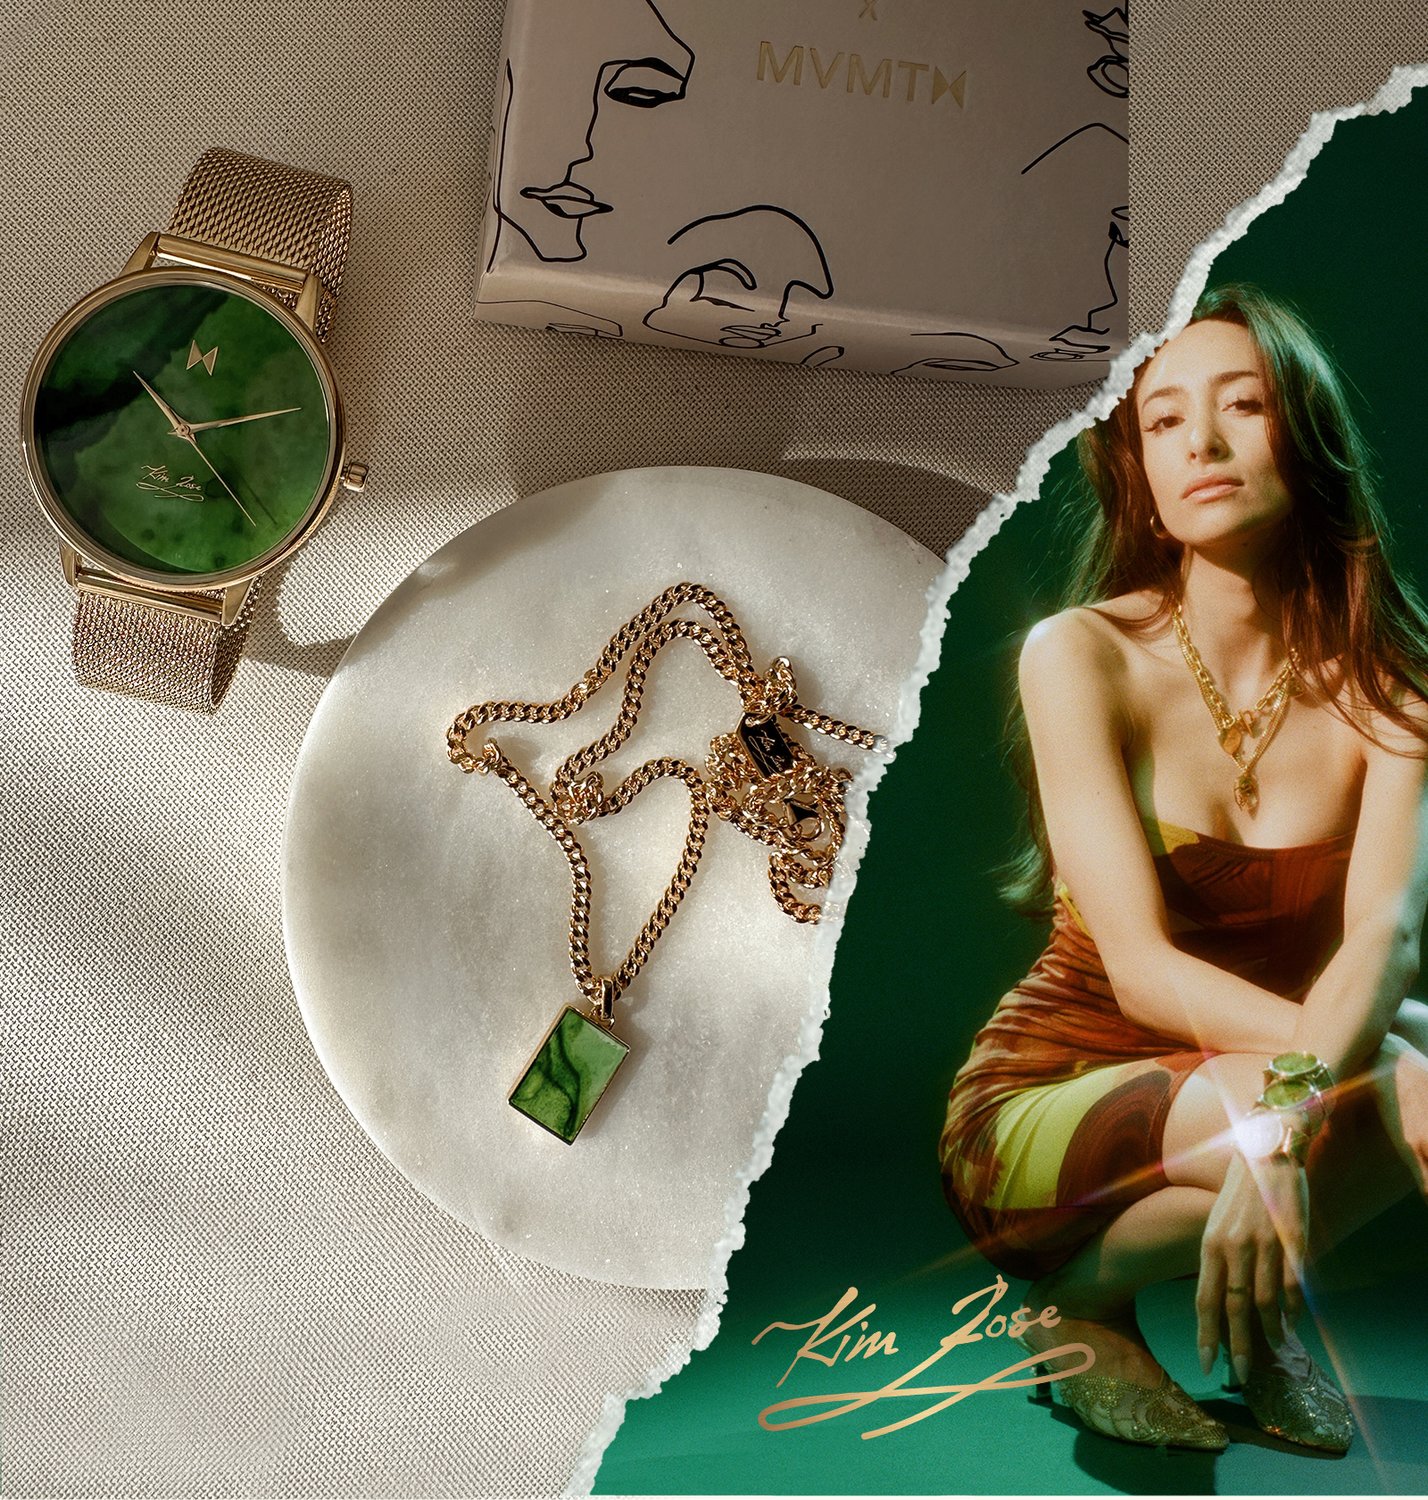 MVMT x Kim Rose watch and necklace with Kim Rose off to the side